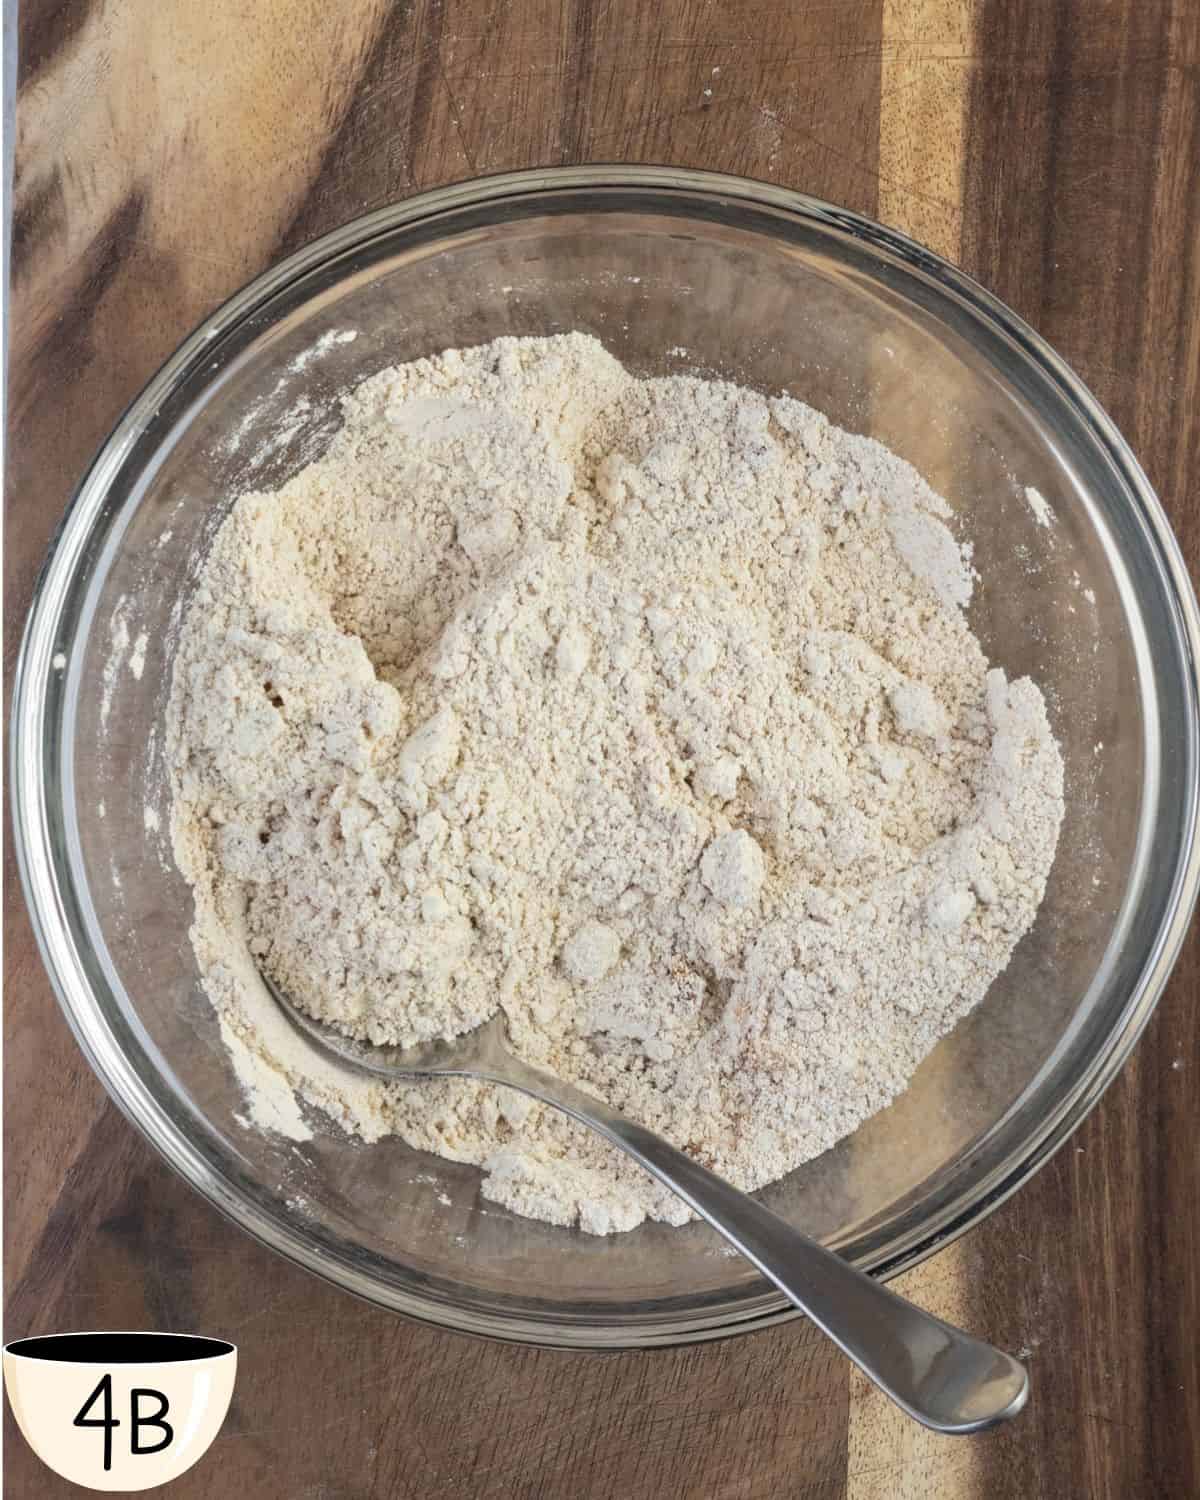 A mixture of dry and wet ingredients in a bowl, showing the first stage of combining them for muffin batter.